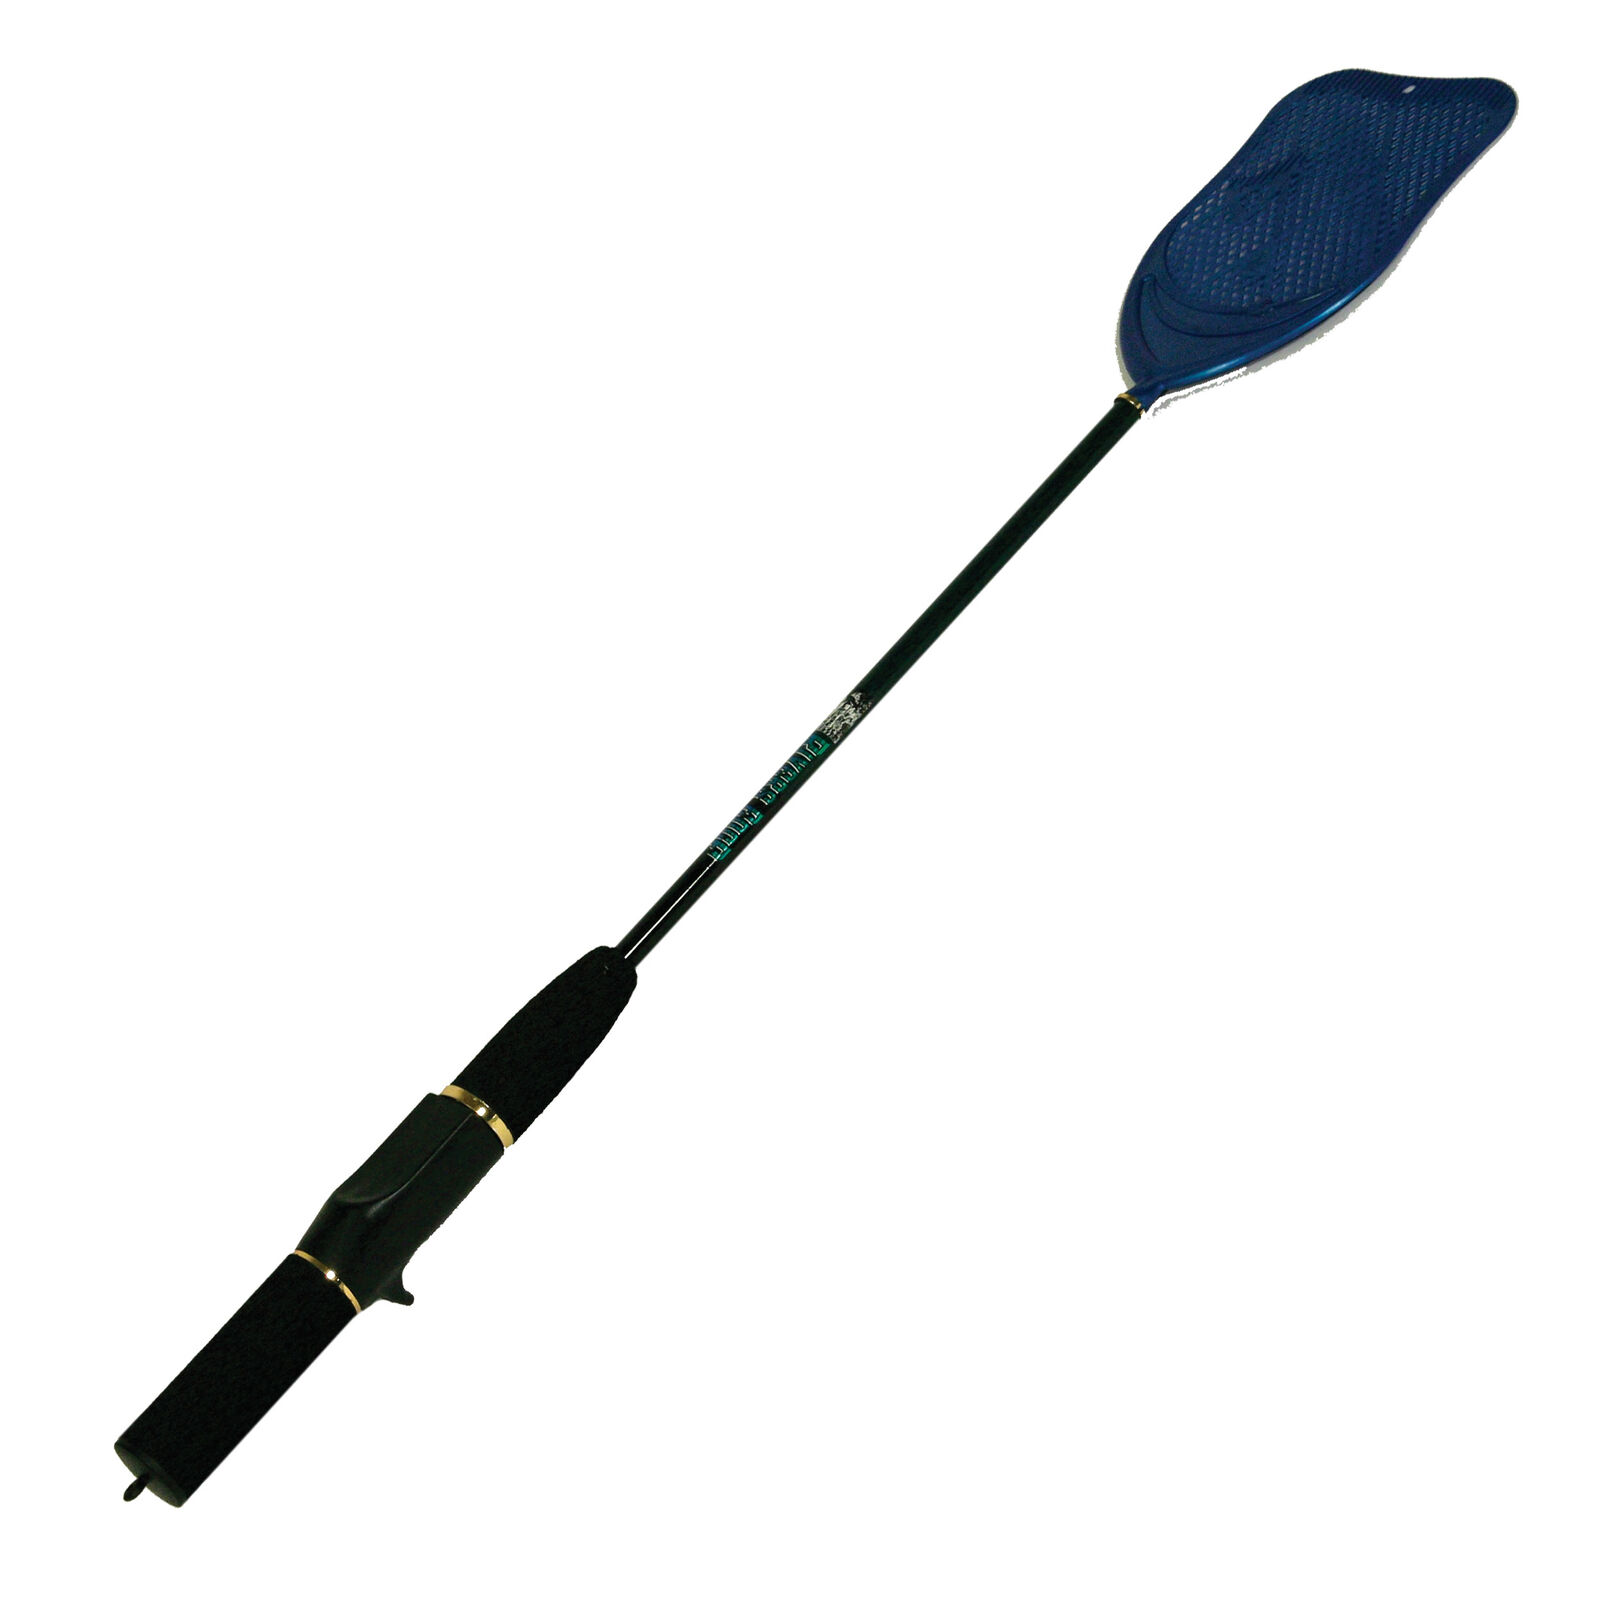 Rivers Edge Products Fishing Rod Fly Swatter, Manual Insect Killer With 26.5"